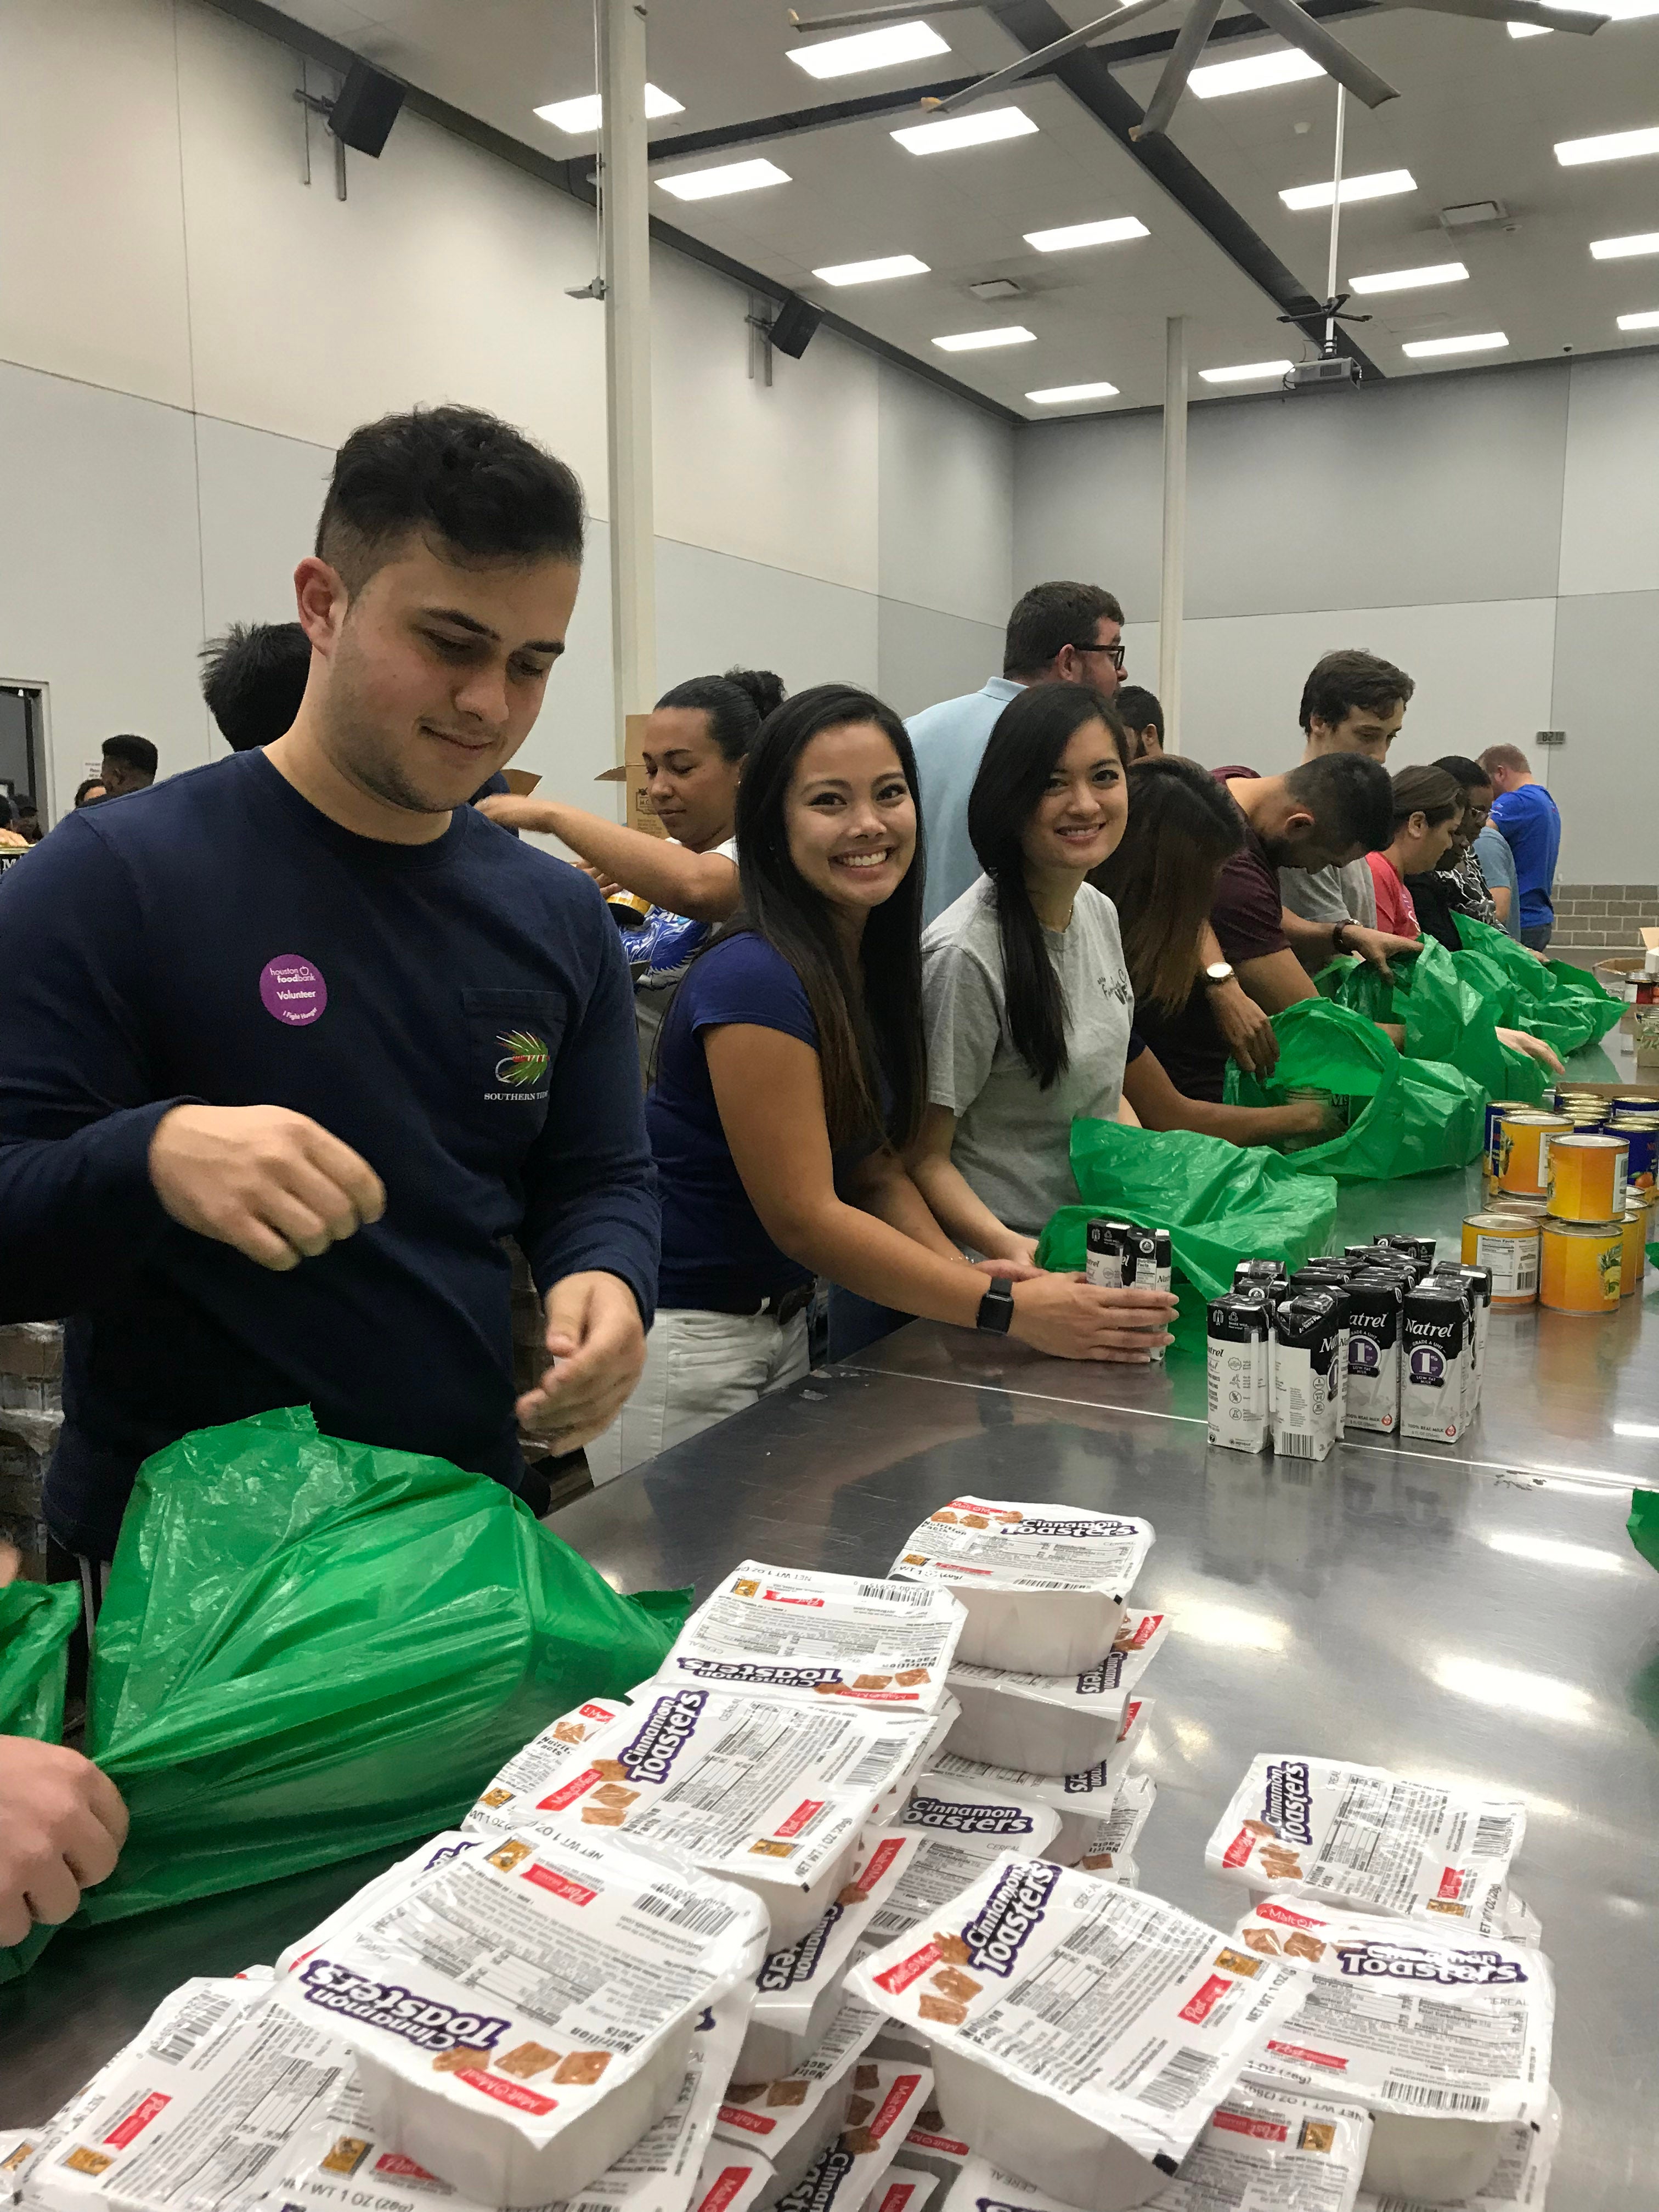 CWRU MSA Houston students in assembly line for packing bags